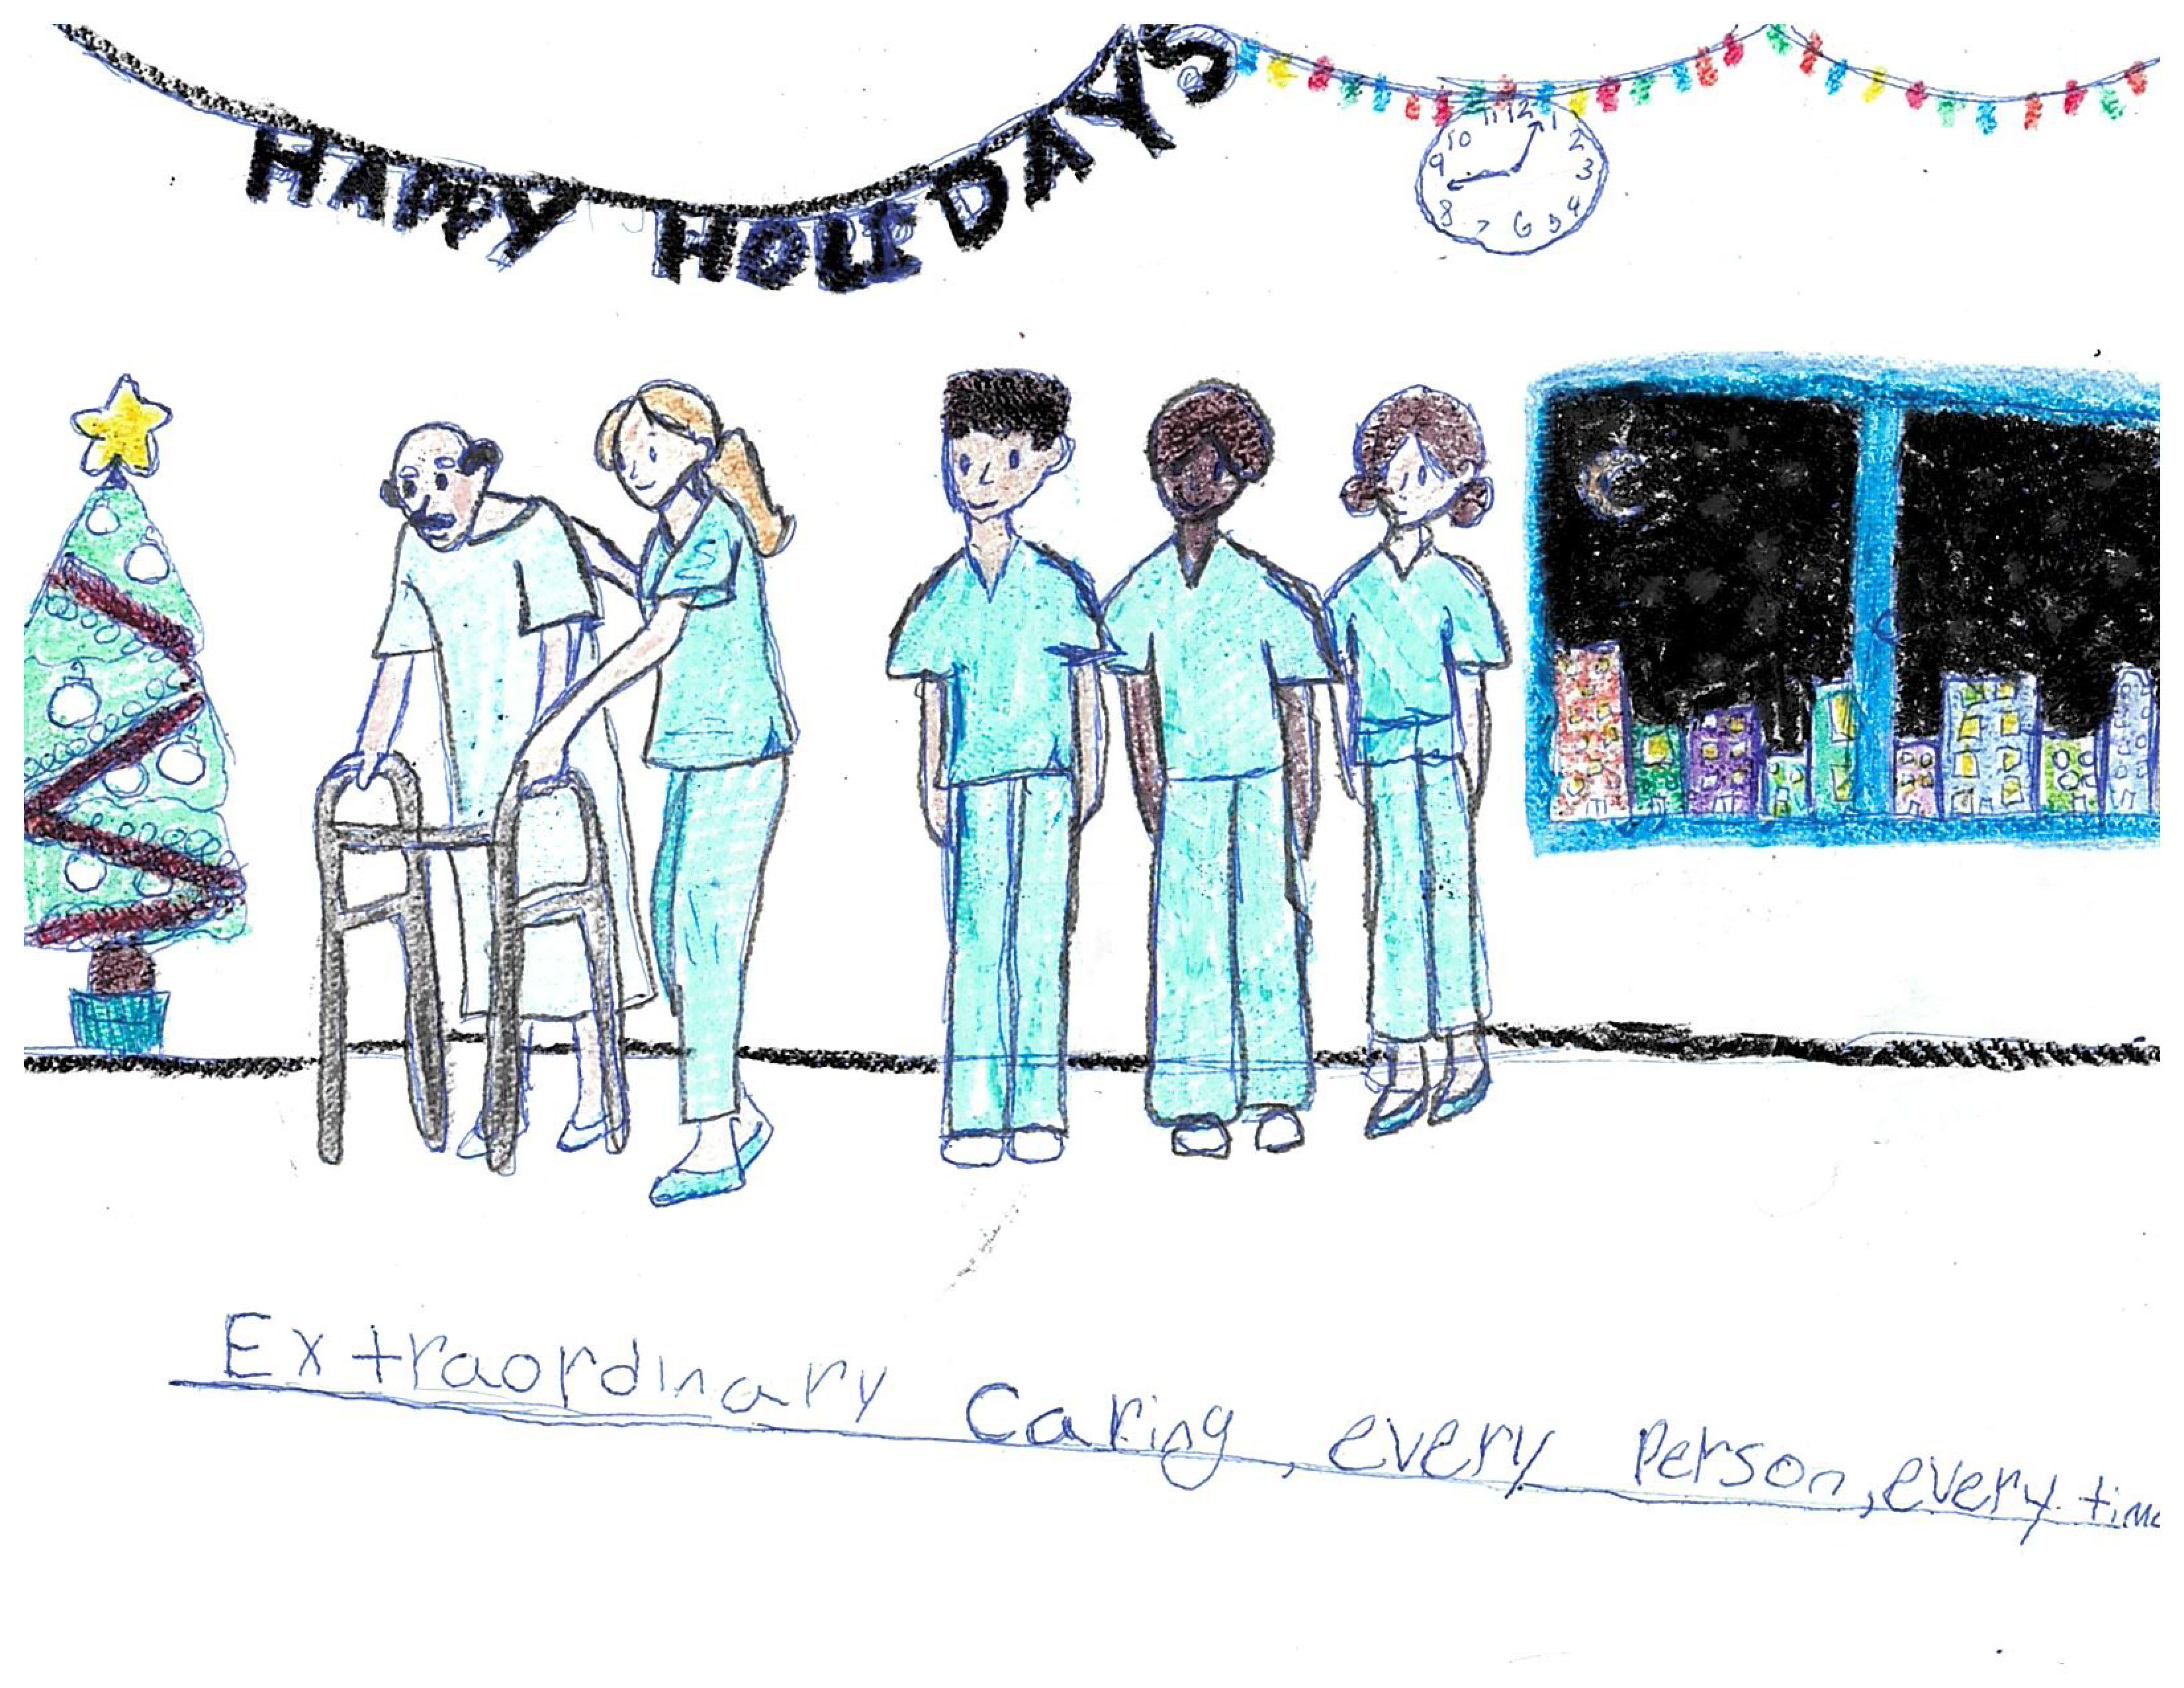 The staff favourite holiday card showing hospital staff helping a patient